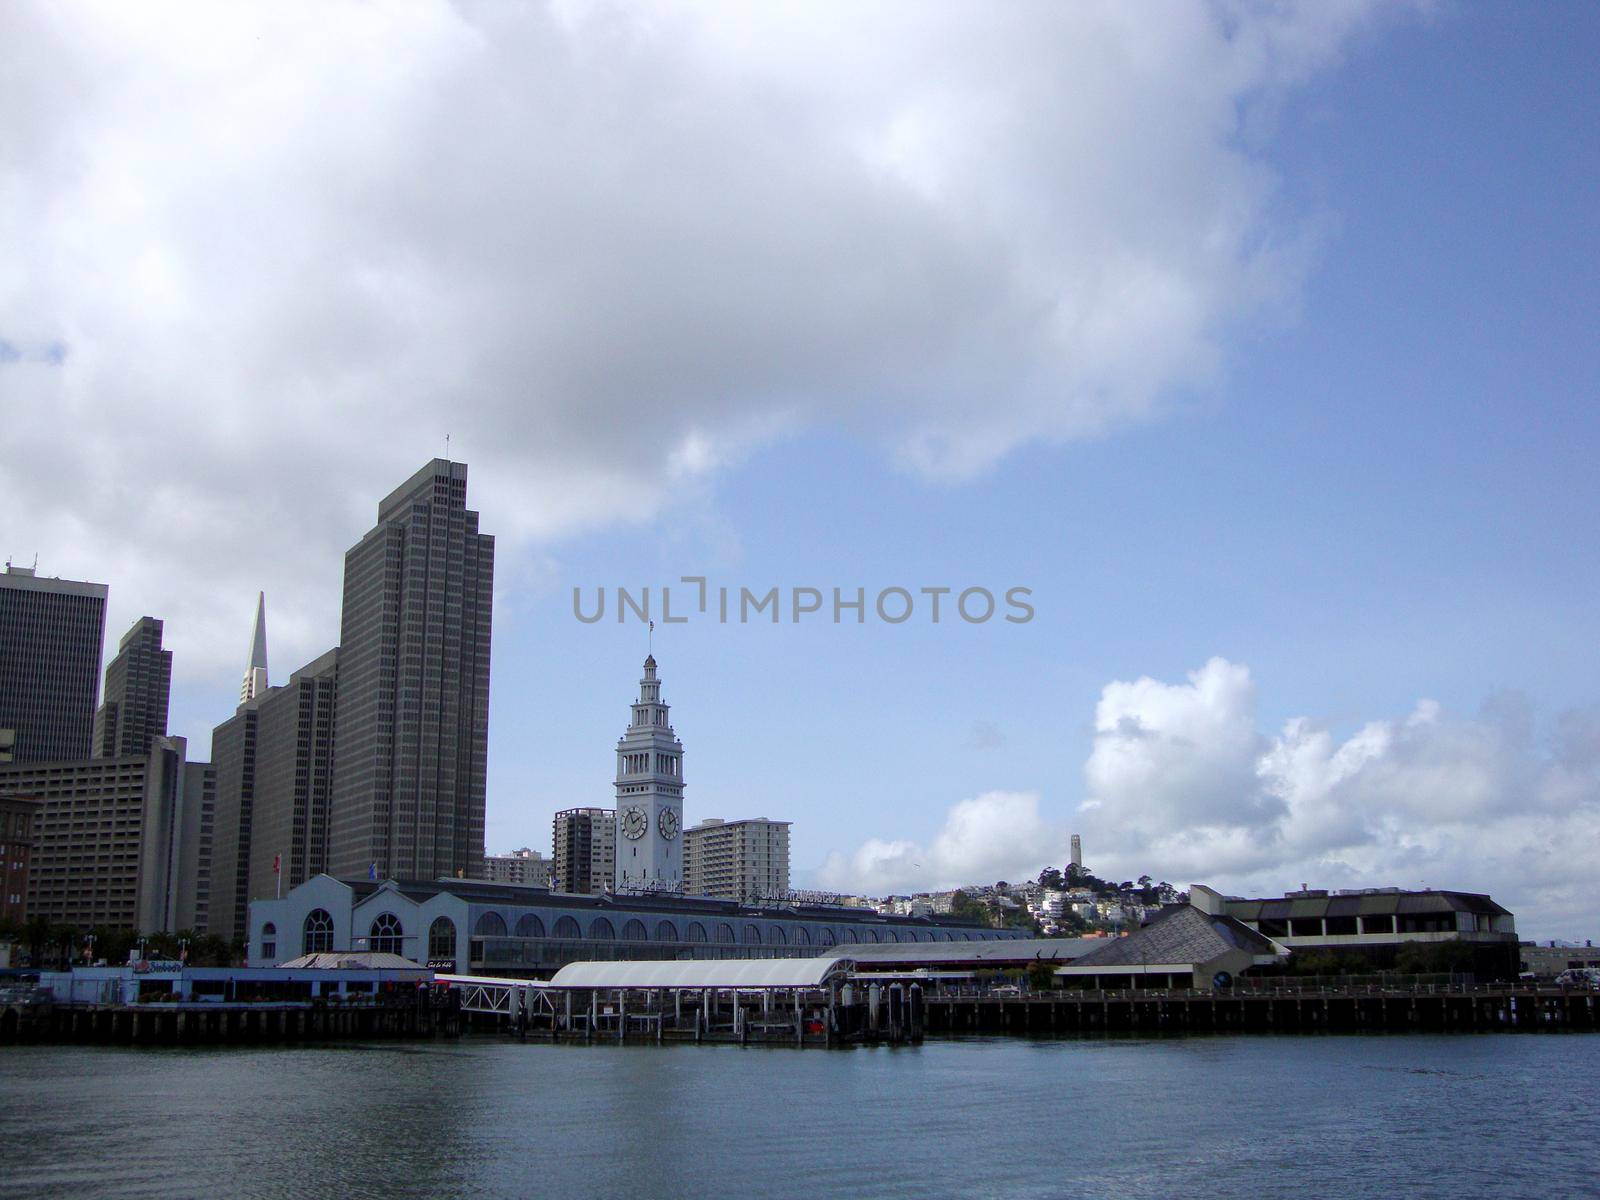 San Francisco -  March 25, 2010: Port of San Francisco Ferry building, Coit Tower, cityscape of Downtown San Francisco on a clear day with birds in the air.  California.